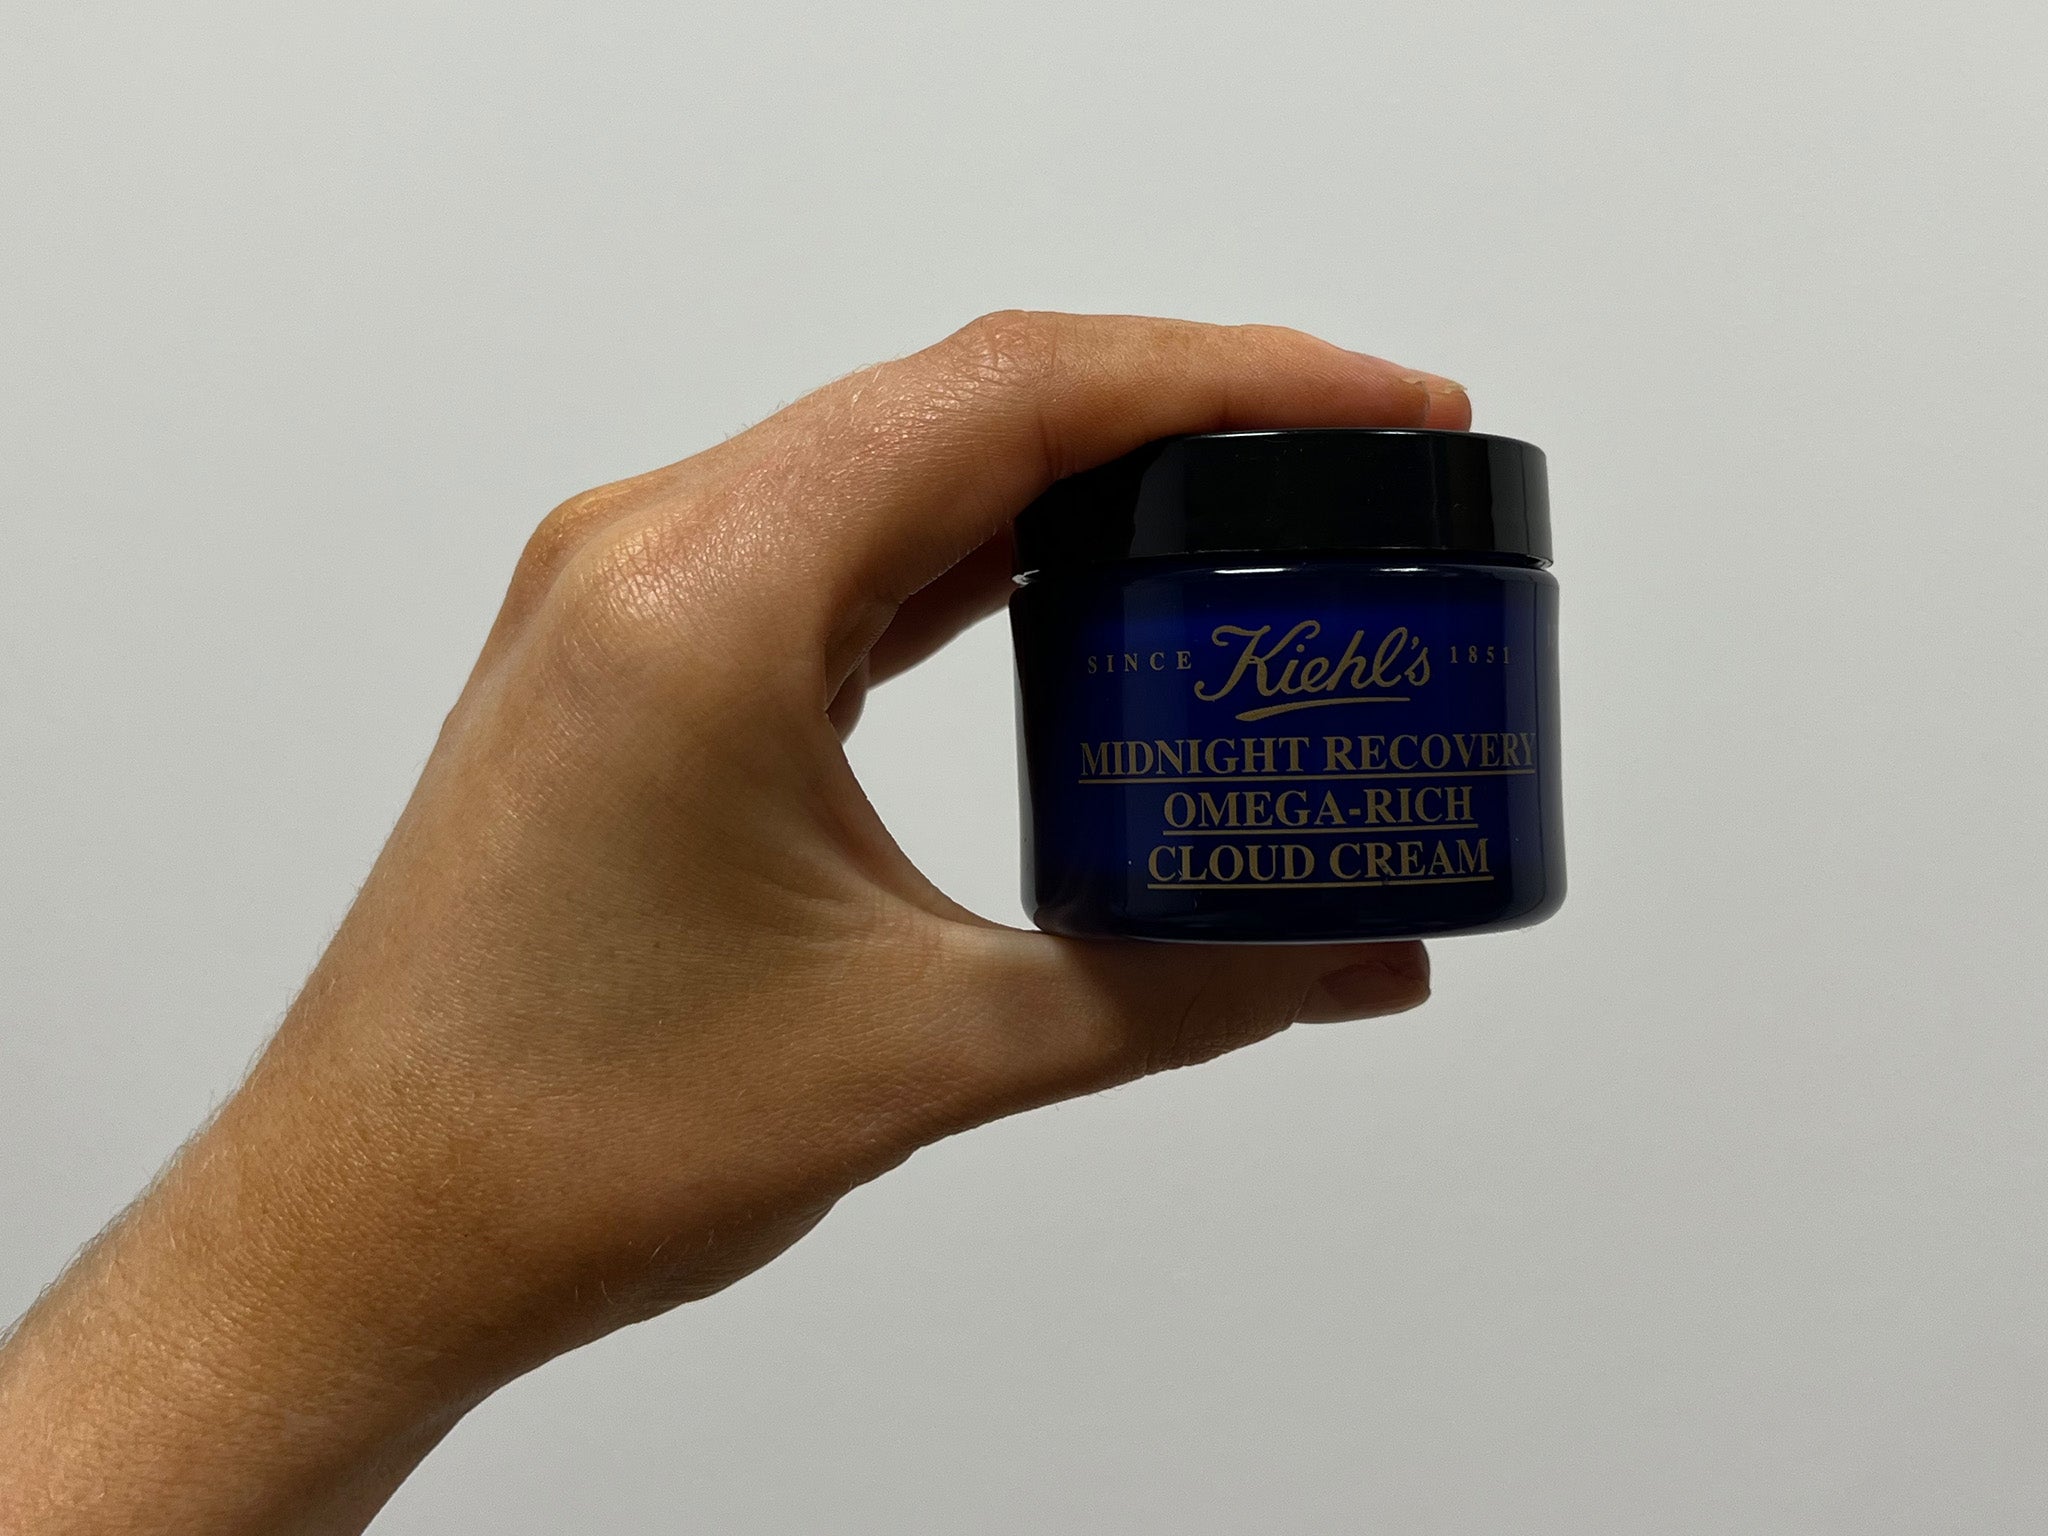 Kiehl’s midnight recovery omega rich cloud cream